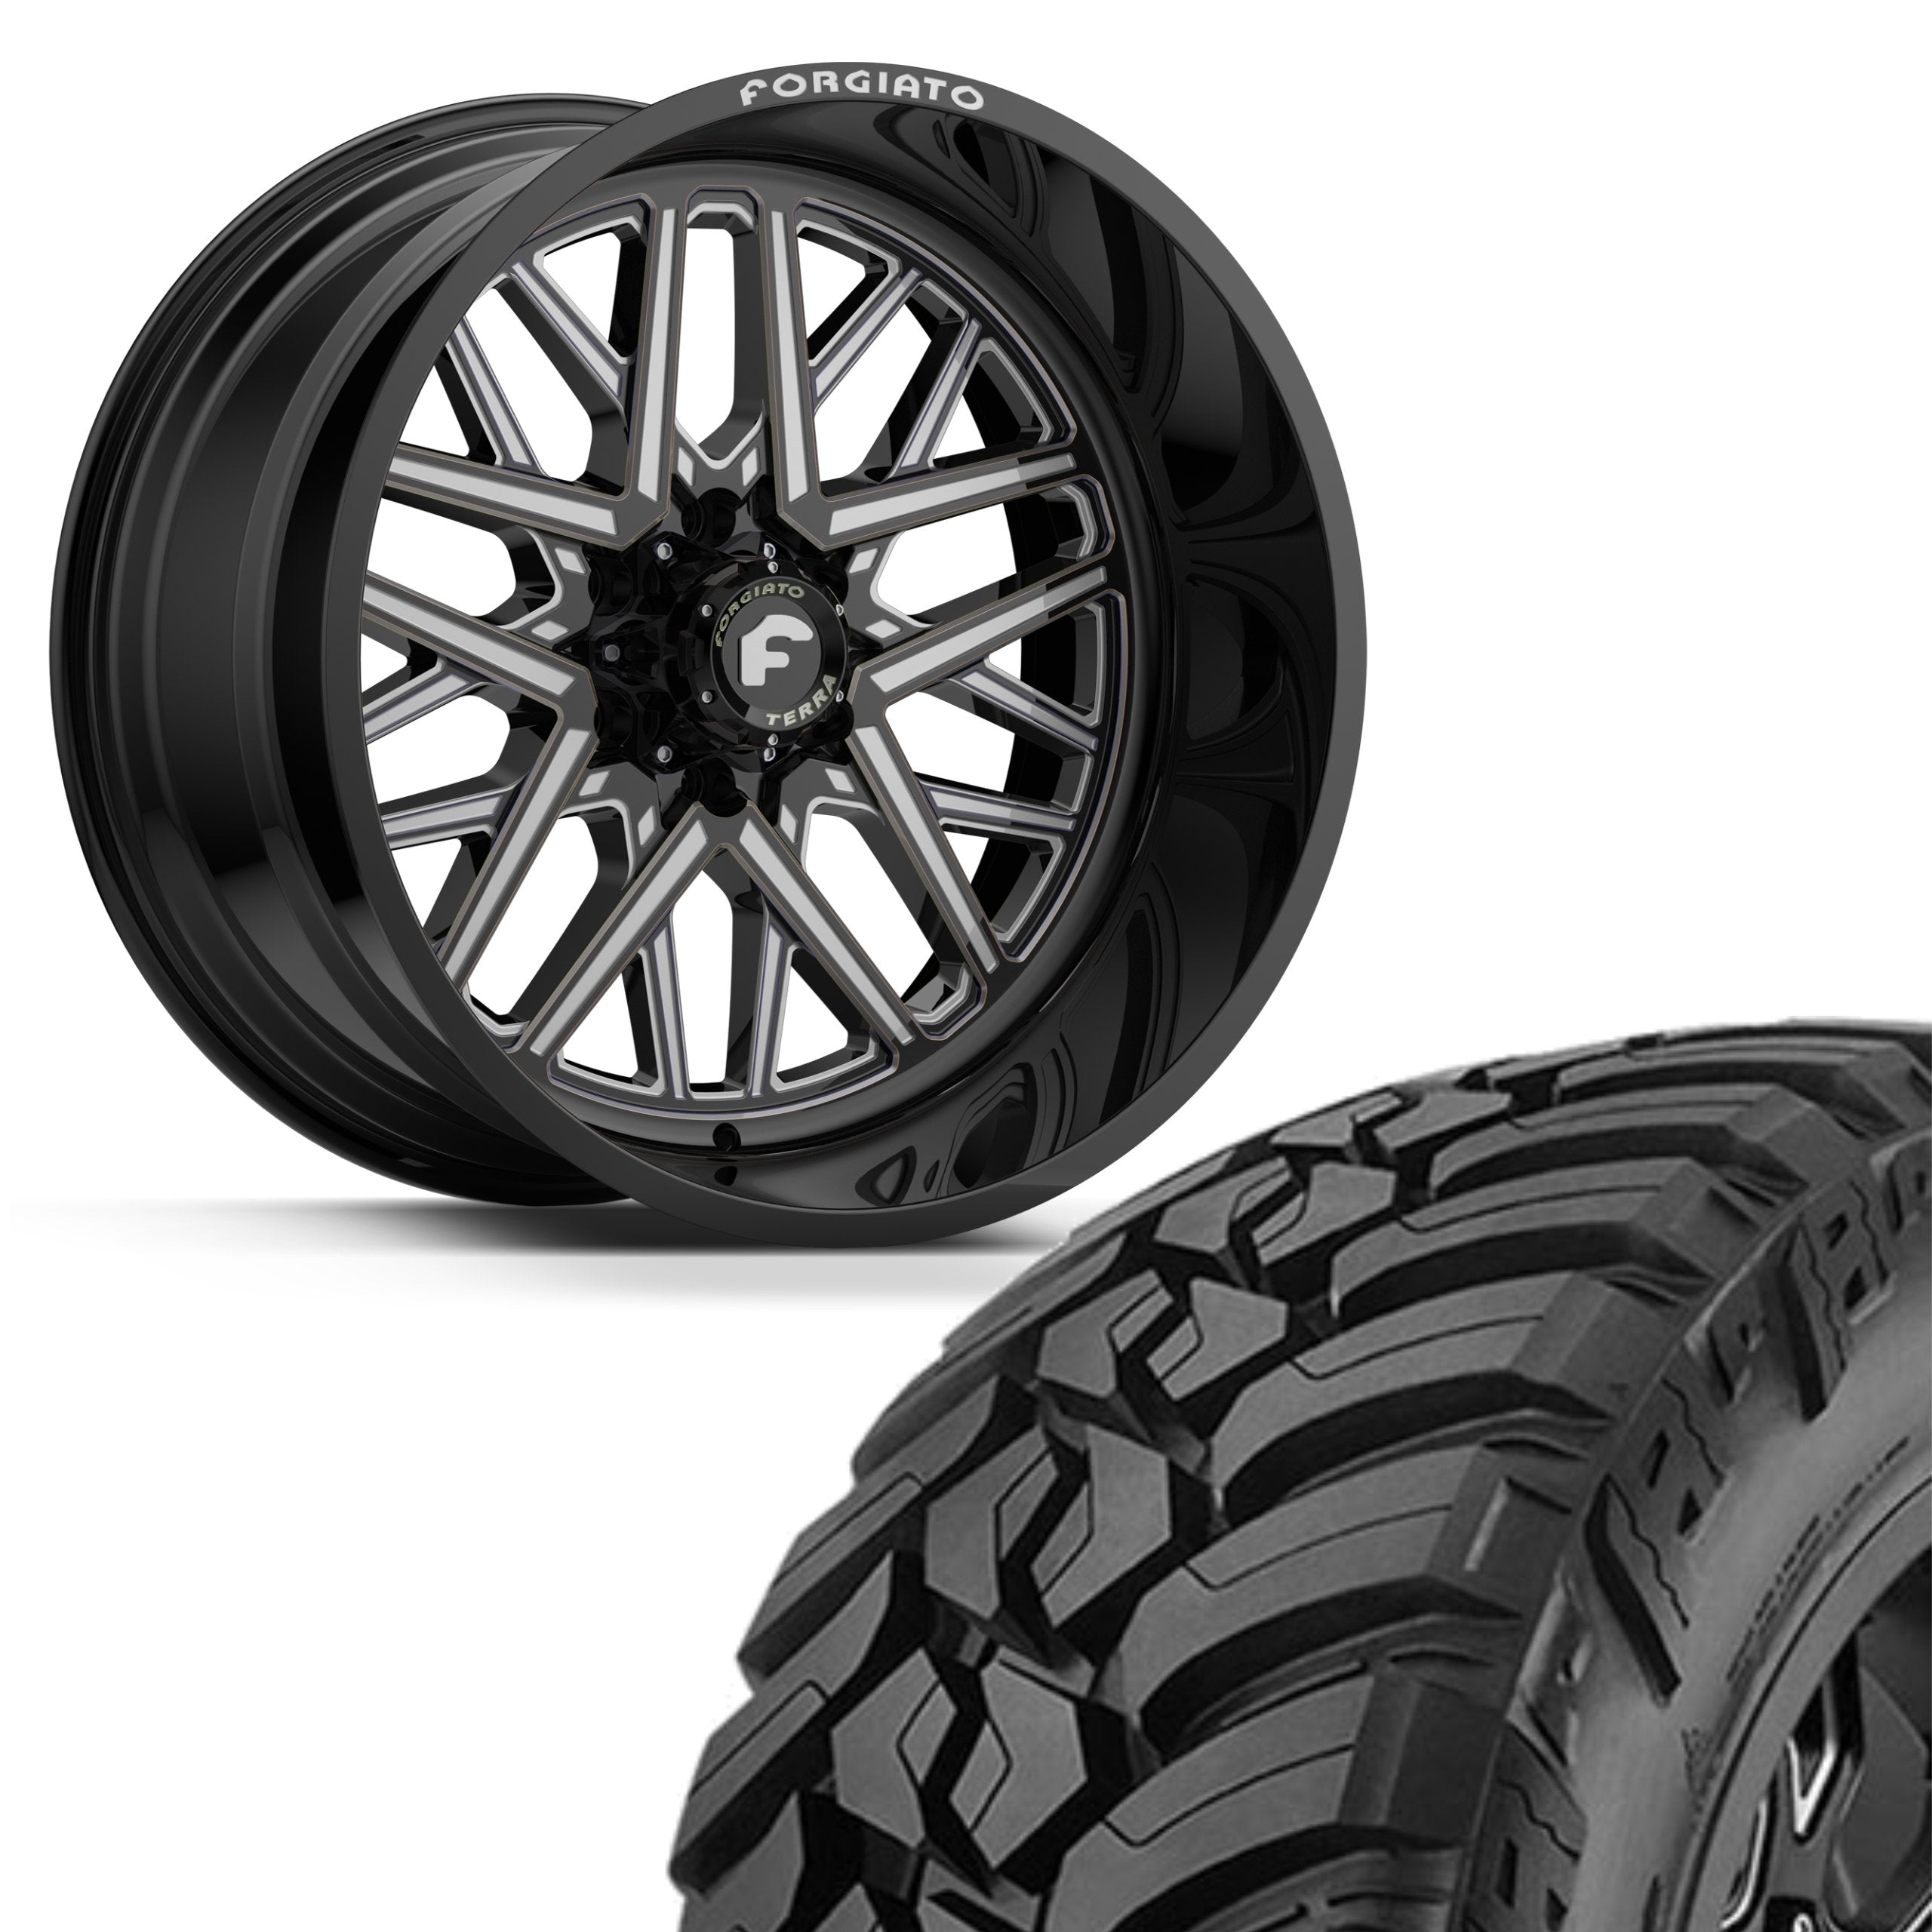 FORGIATO FLOW TERRA 005 24x14 6x135/139.7 6x5.5 -76 OFFROAD BLACK/MILLED | AMP M/T 37x13.50R24 (Wheel and Tire Package) - Tires and Engine Performance